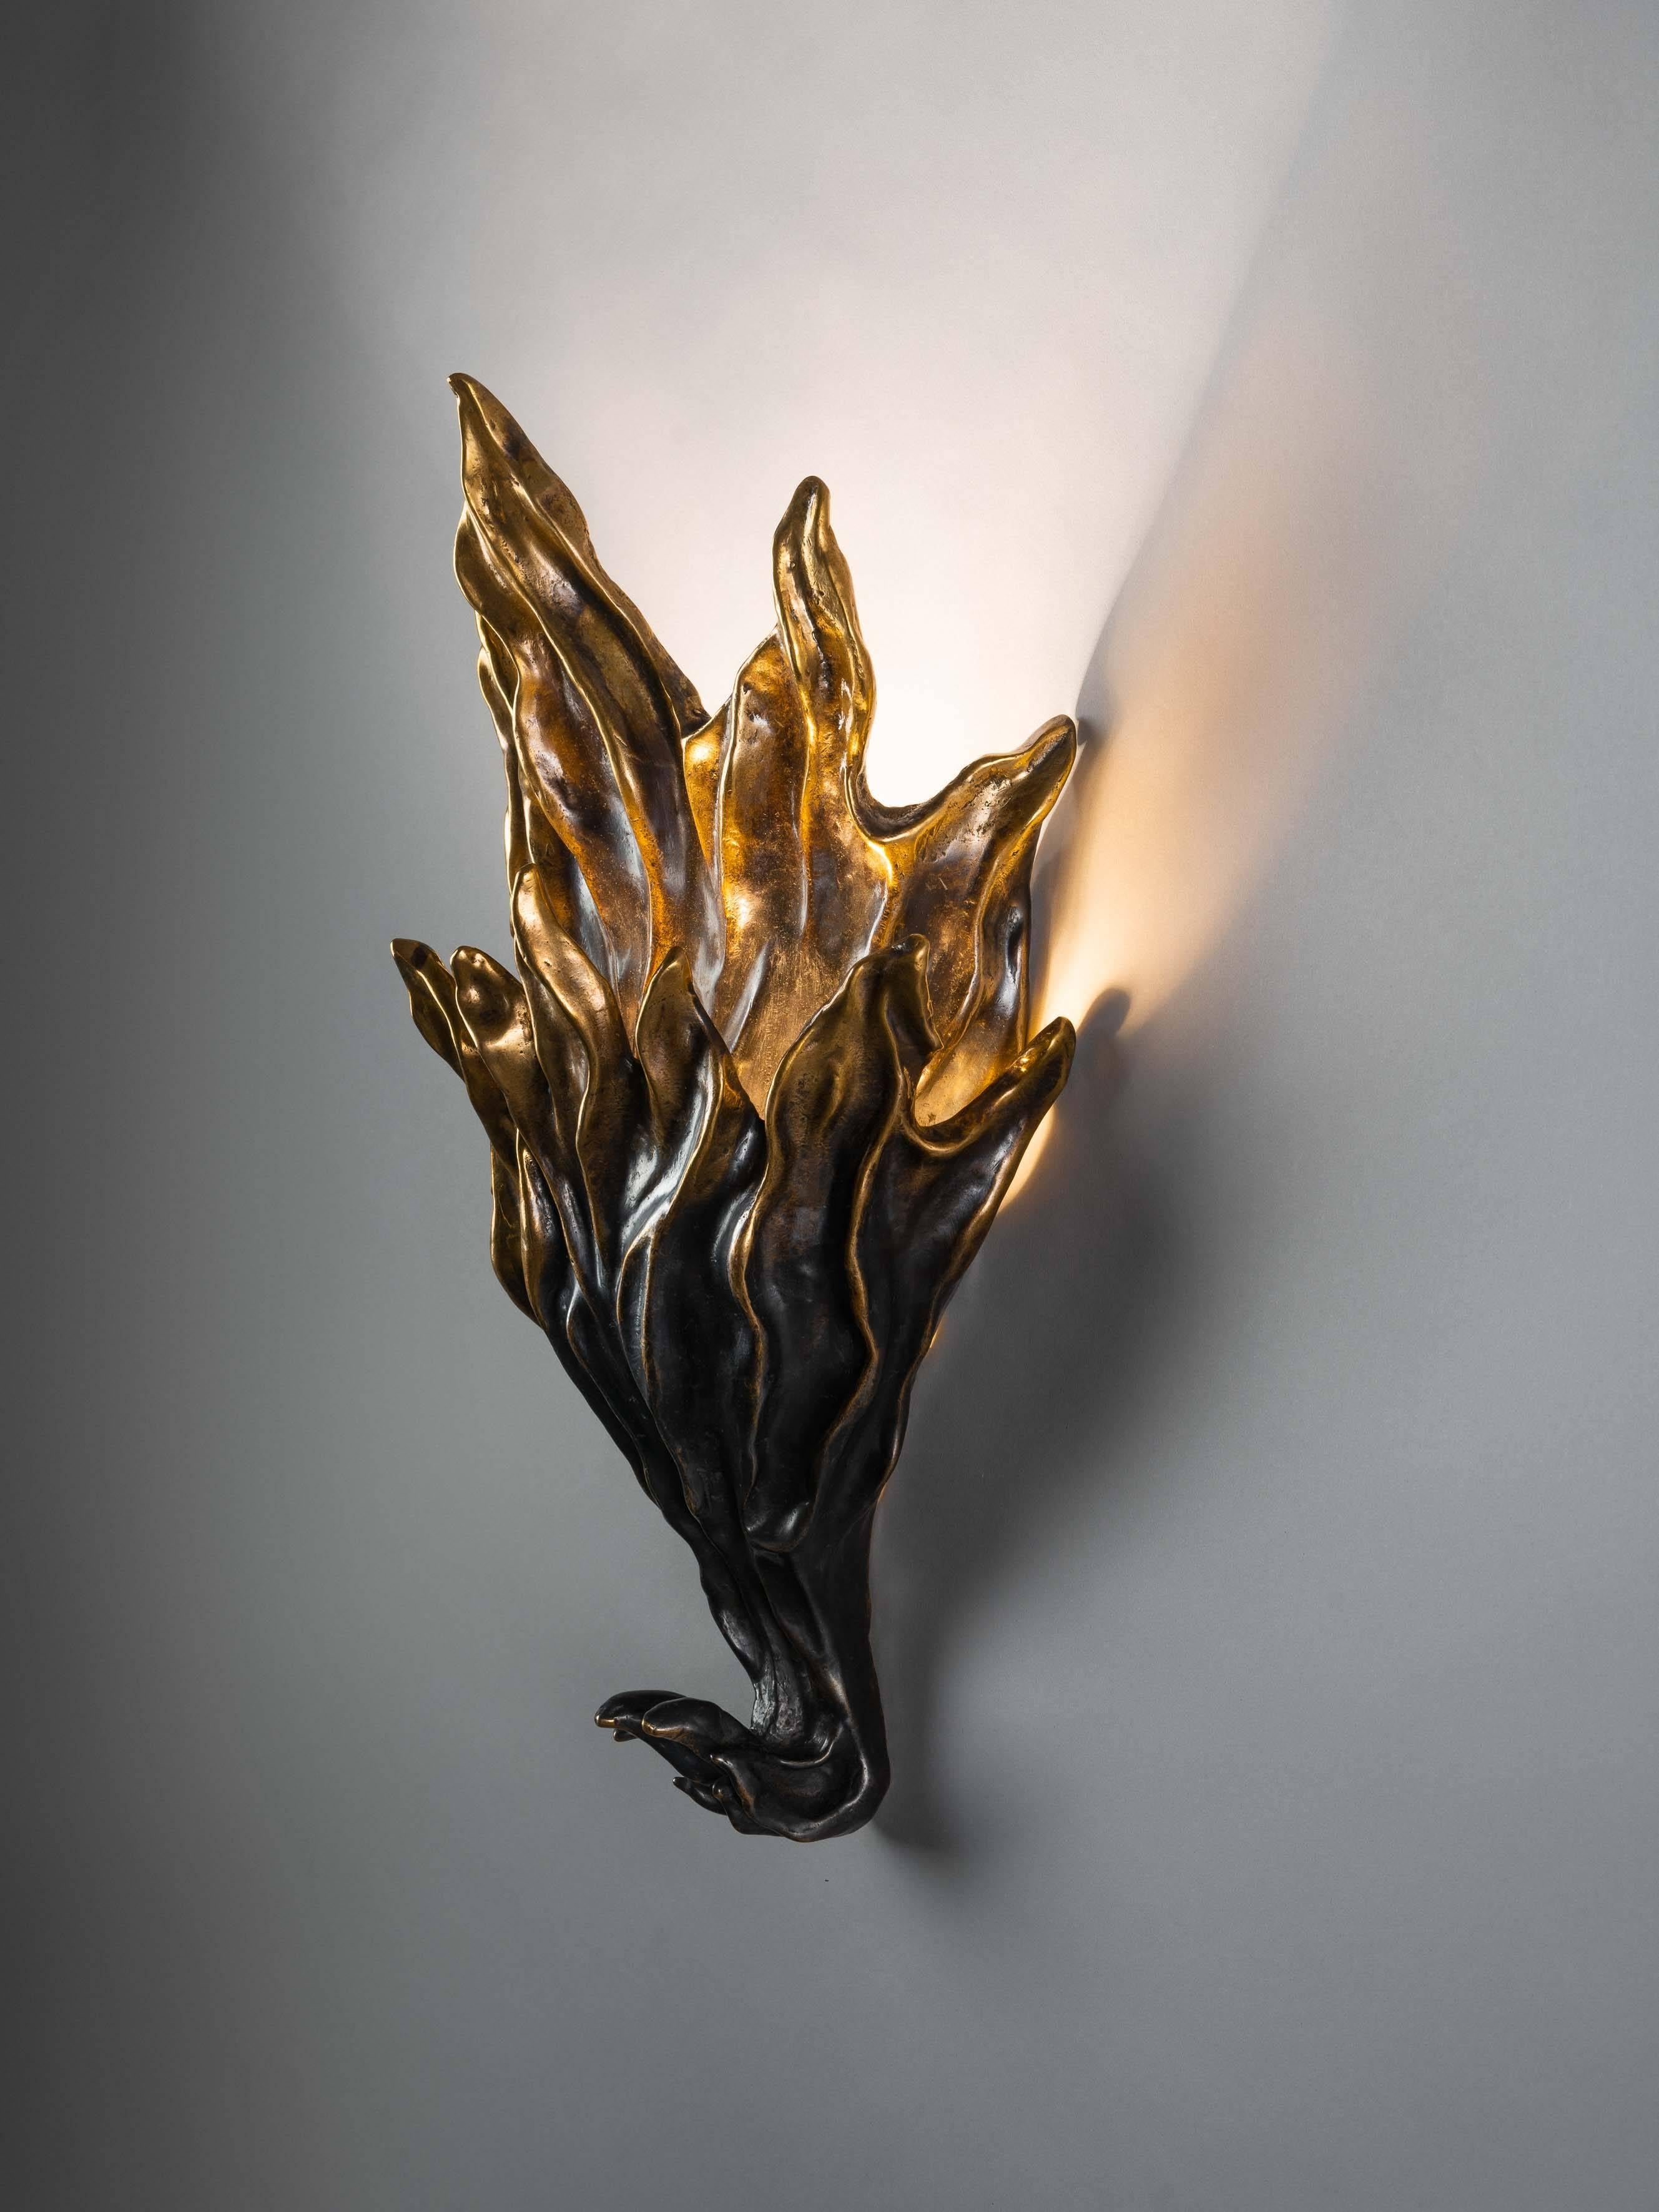 Please note dimensions differ on the two sconces as they are slightly different designs. 

Mattia Bonetti
Sconce 'Fires I ' 
2017
Patinated bronze
Measure: H 48 x L 28 x D 15 cm / H 18.9 x L 11 x D 5.9 in
David Gill Gallery